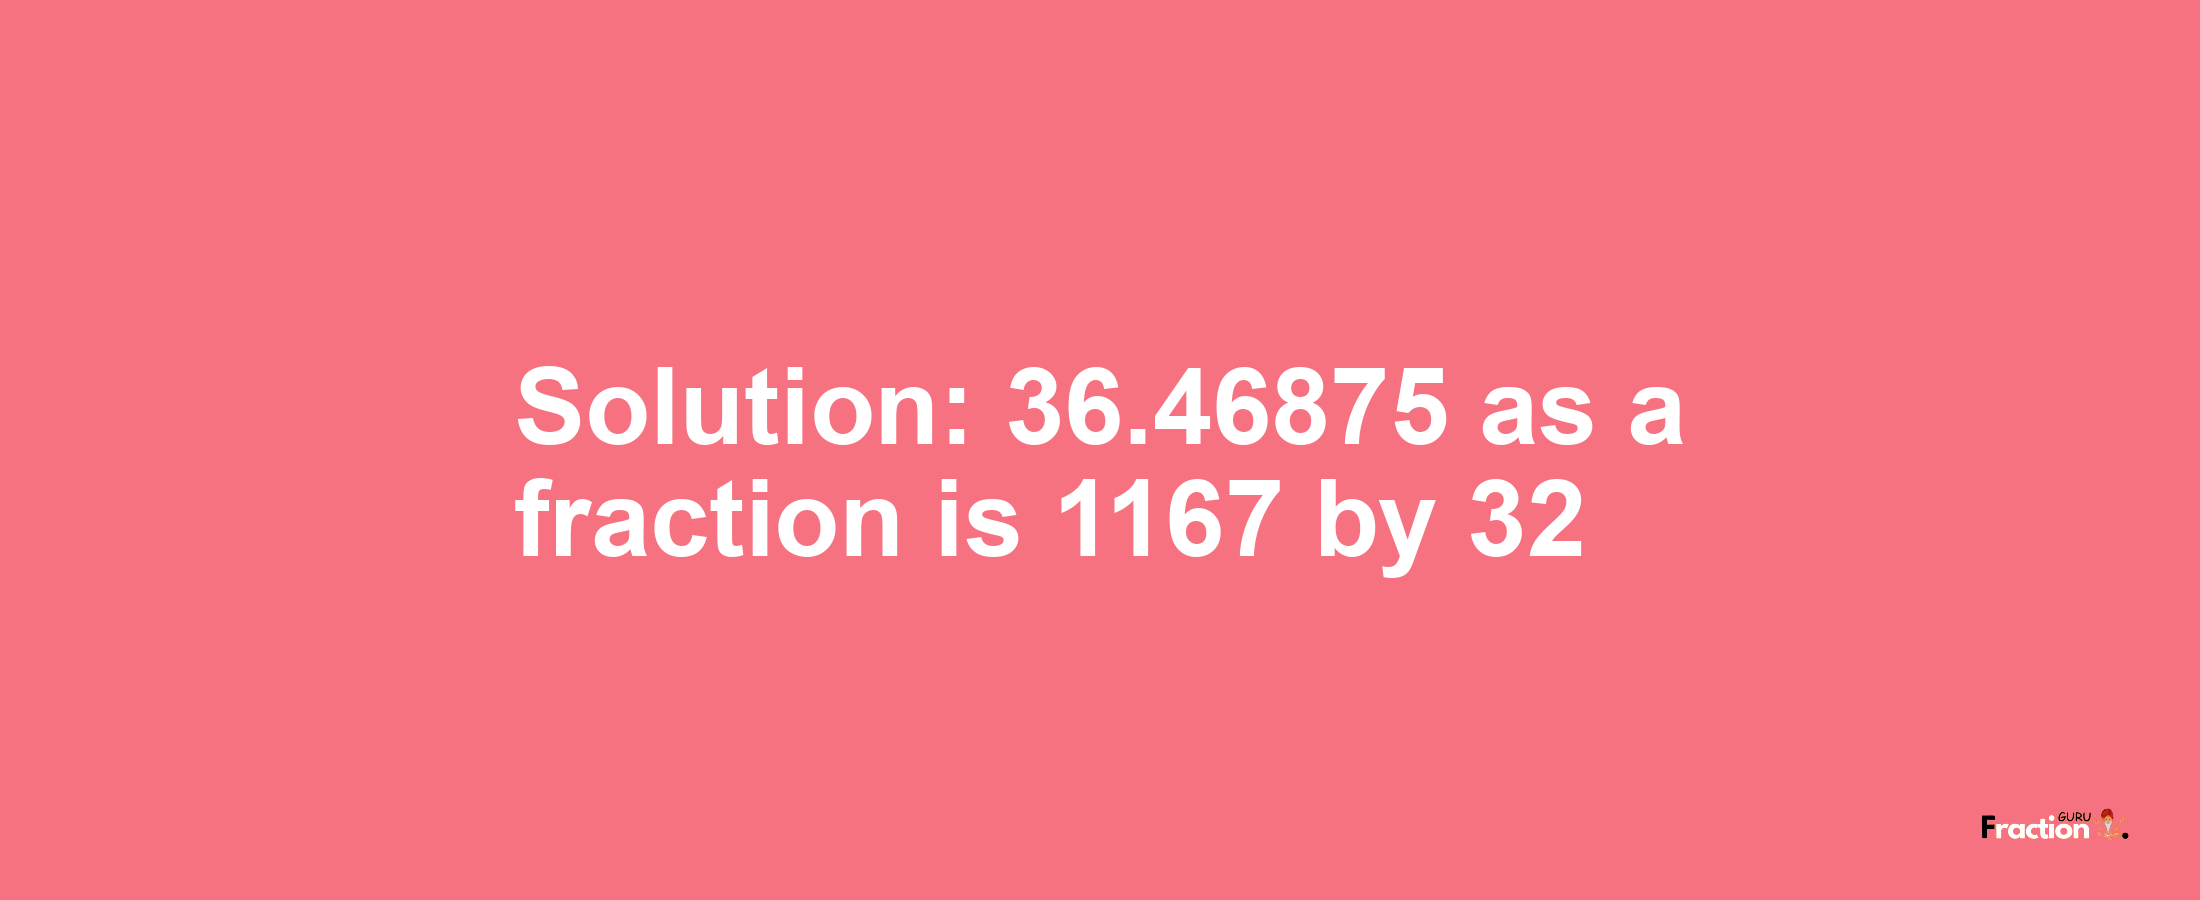 Solution:36.46875 as a fraction is 1167/32